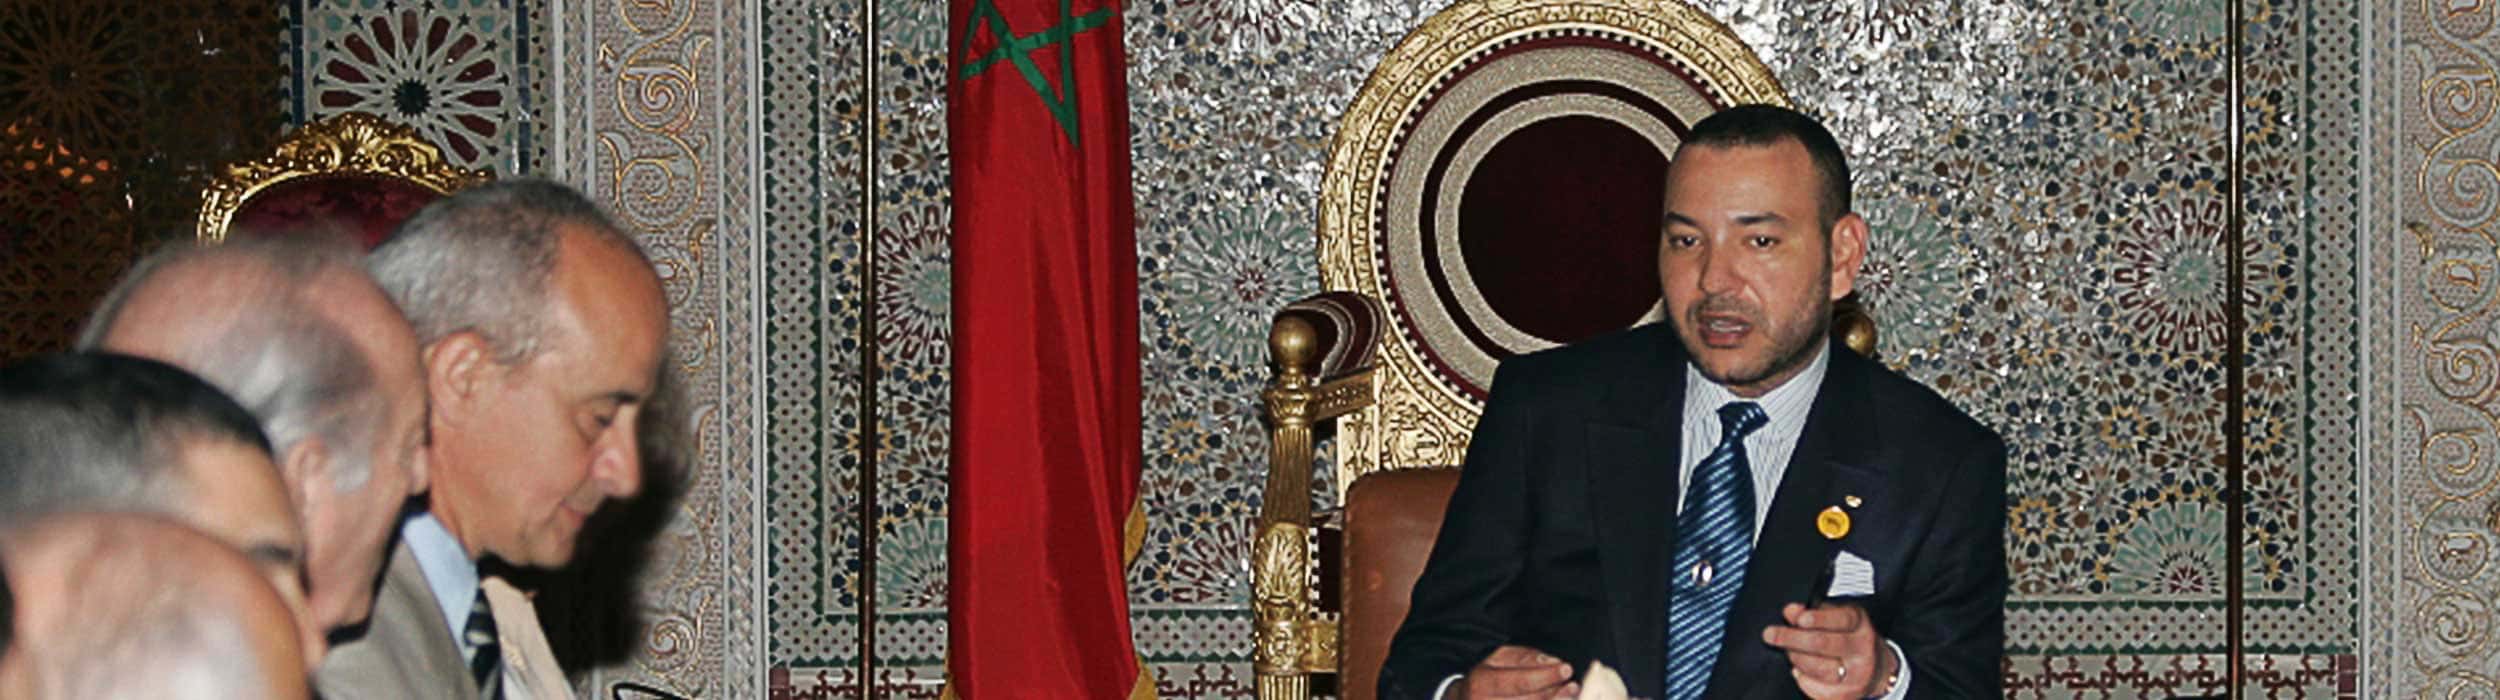 His Majesty King Mohammed VI 